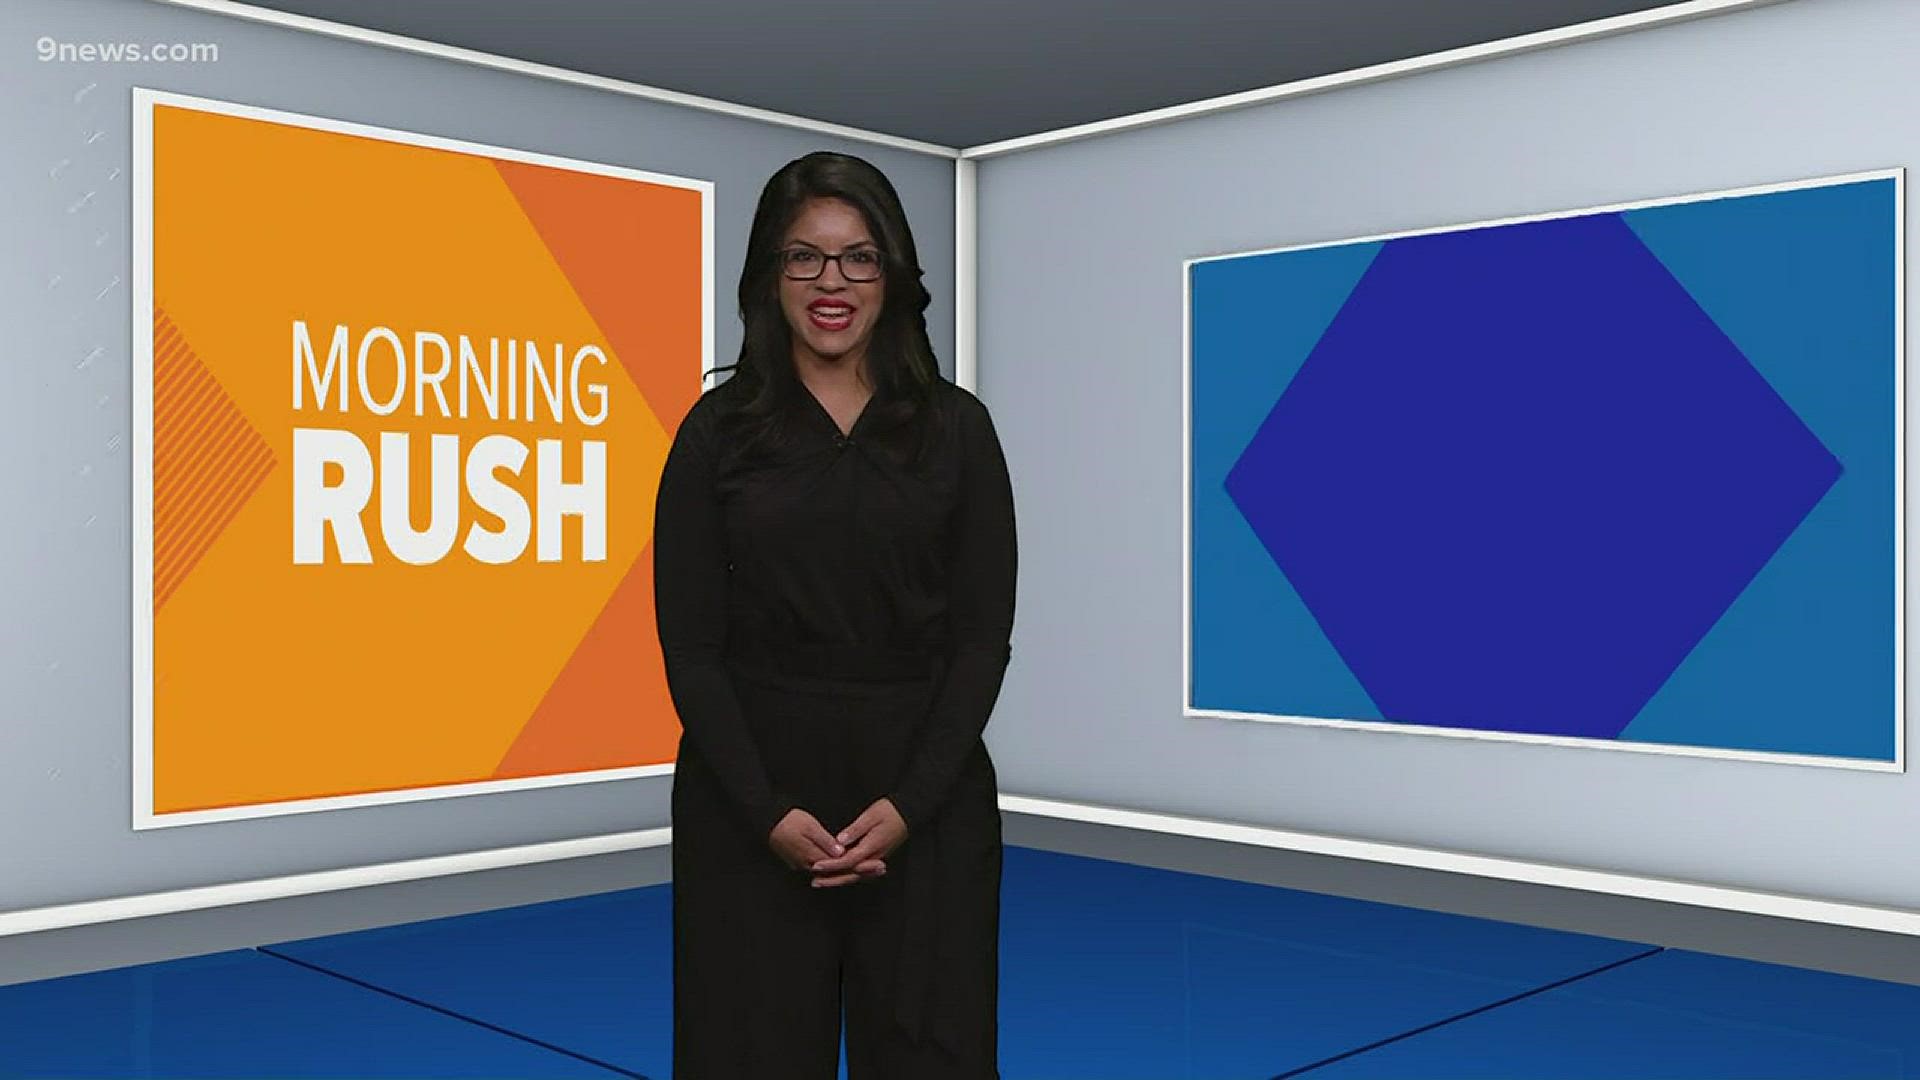 The top morning headlines and weather for Monday, March 25, 2019